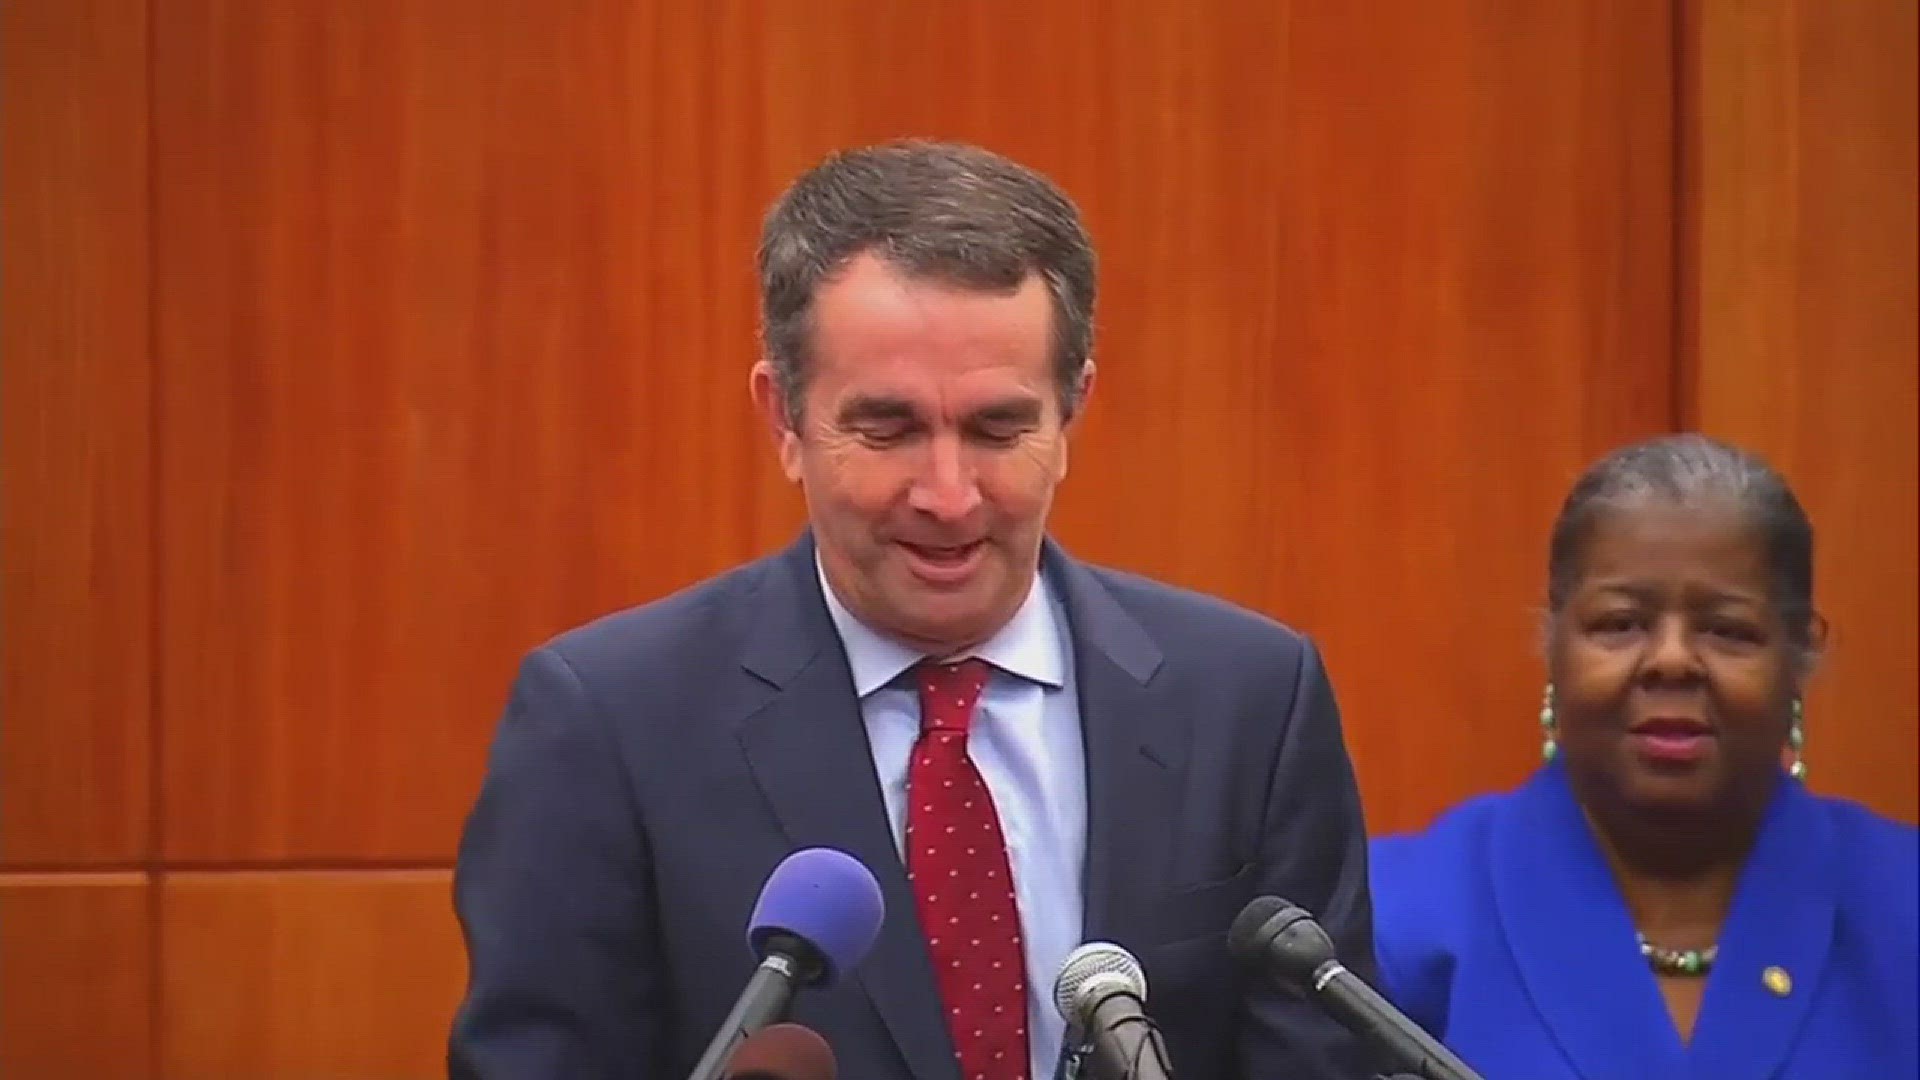 Virginia Governor-elect Ralph Northam holds a press conference on the morning after his electoral victory over Republican Ed Gillespie.